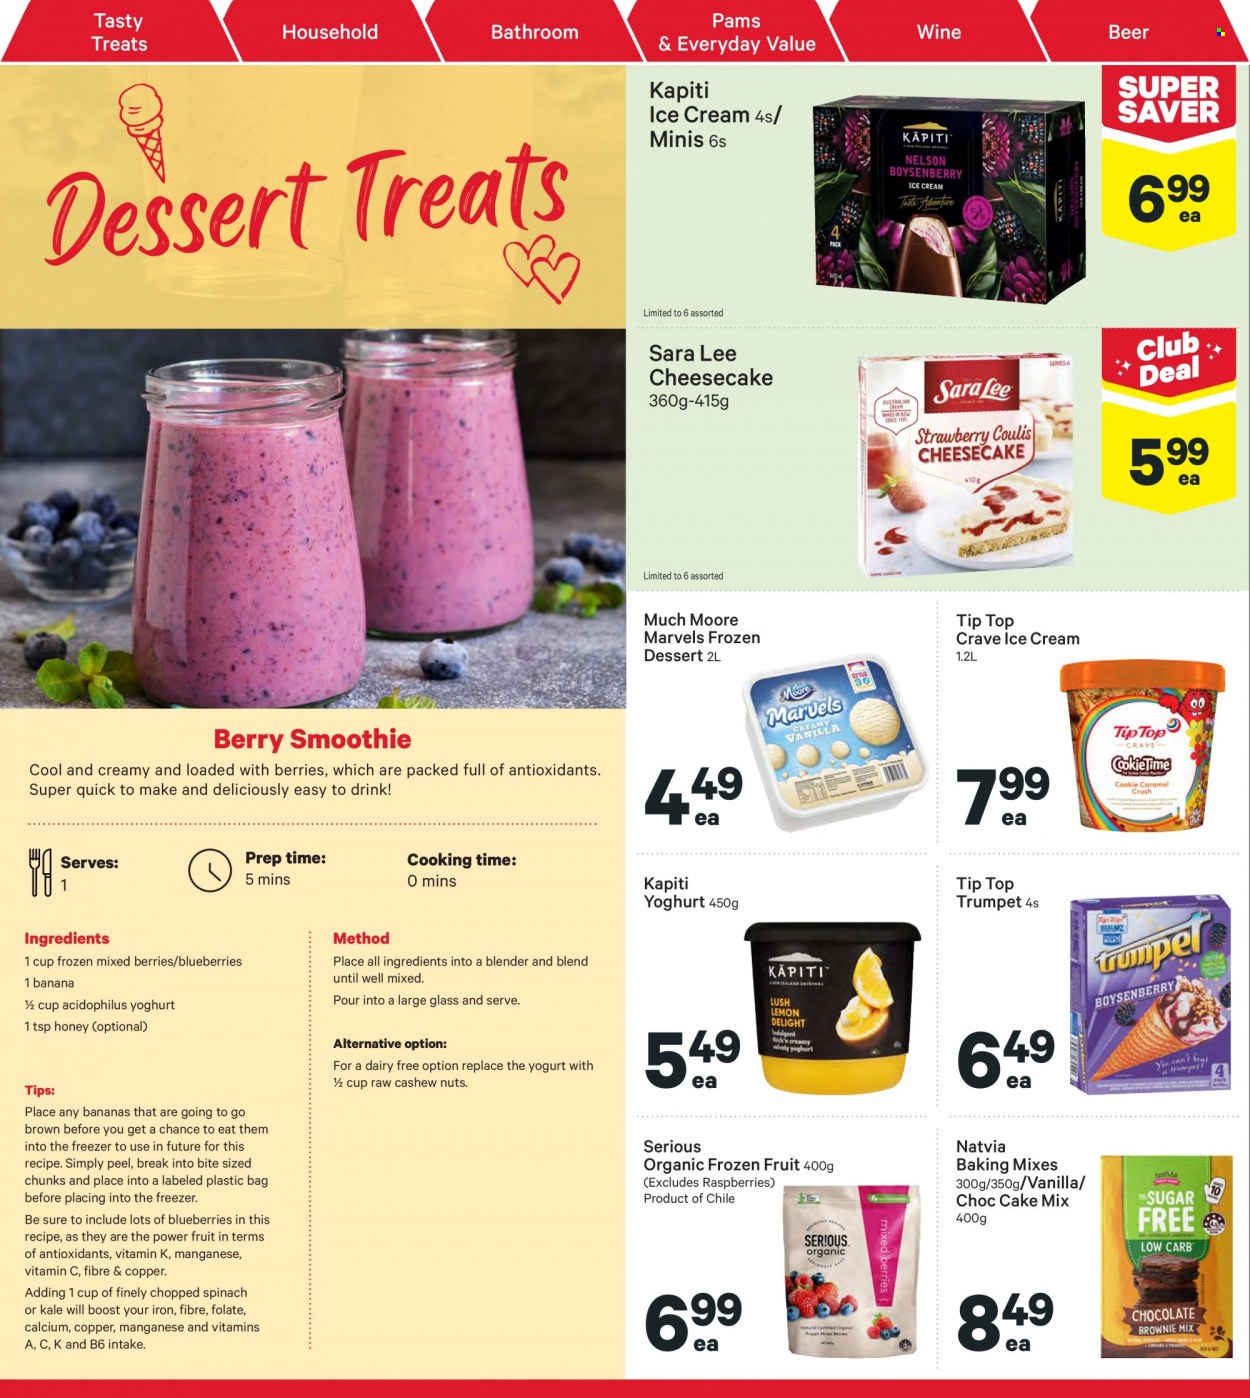 thumbnail - New World mailer - 16.05.2022 - 22.05.2022 - Sales products - Tip Top, Sara Lee, cake mix, kale, yoghurt, Much Moore, organic frozen fruit, honey, cashews, Boost, wine, beer, Sure, calcium, vitamin c. Page 18.